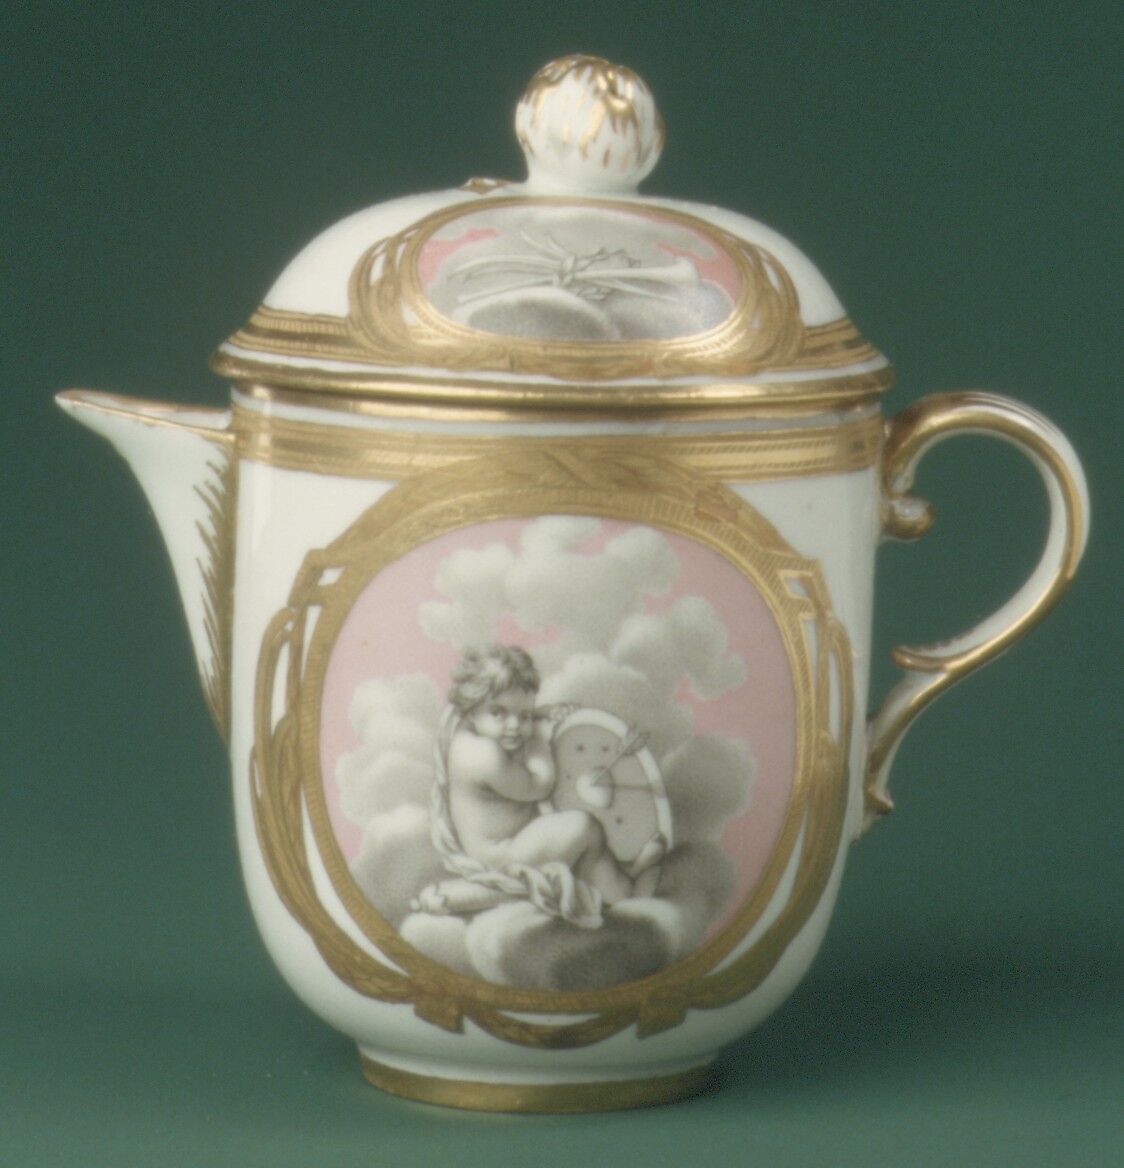 Milk jug (from a tea service), Imperial Porcelain Manufactory, St. Petersburg (Russian, 1744–present), Hard-paste porcelain, Russian, St. Petersburg 